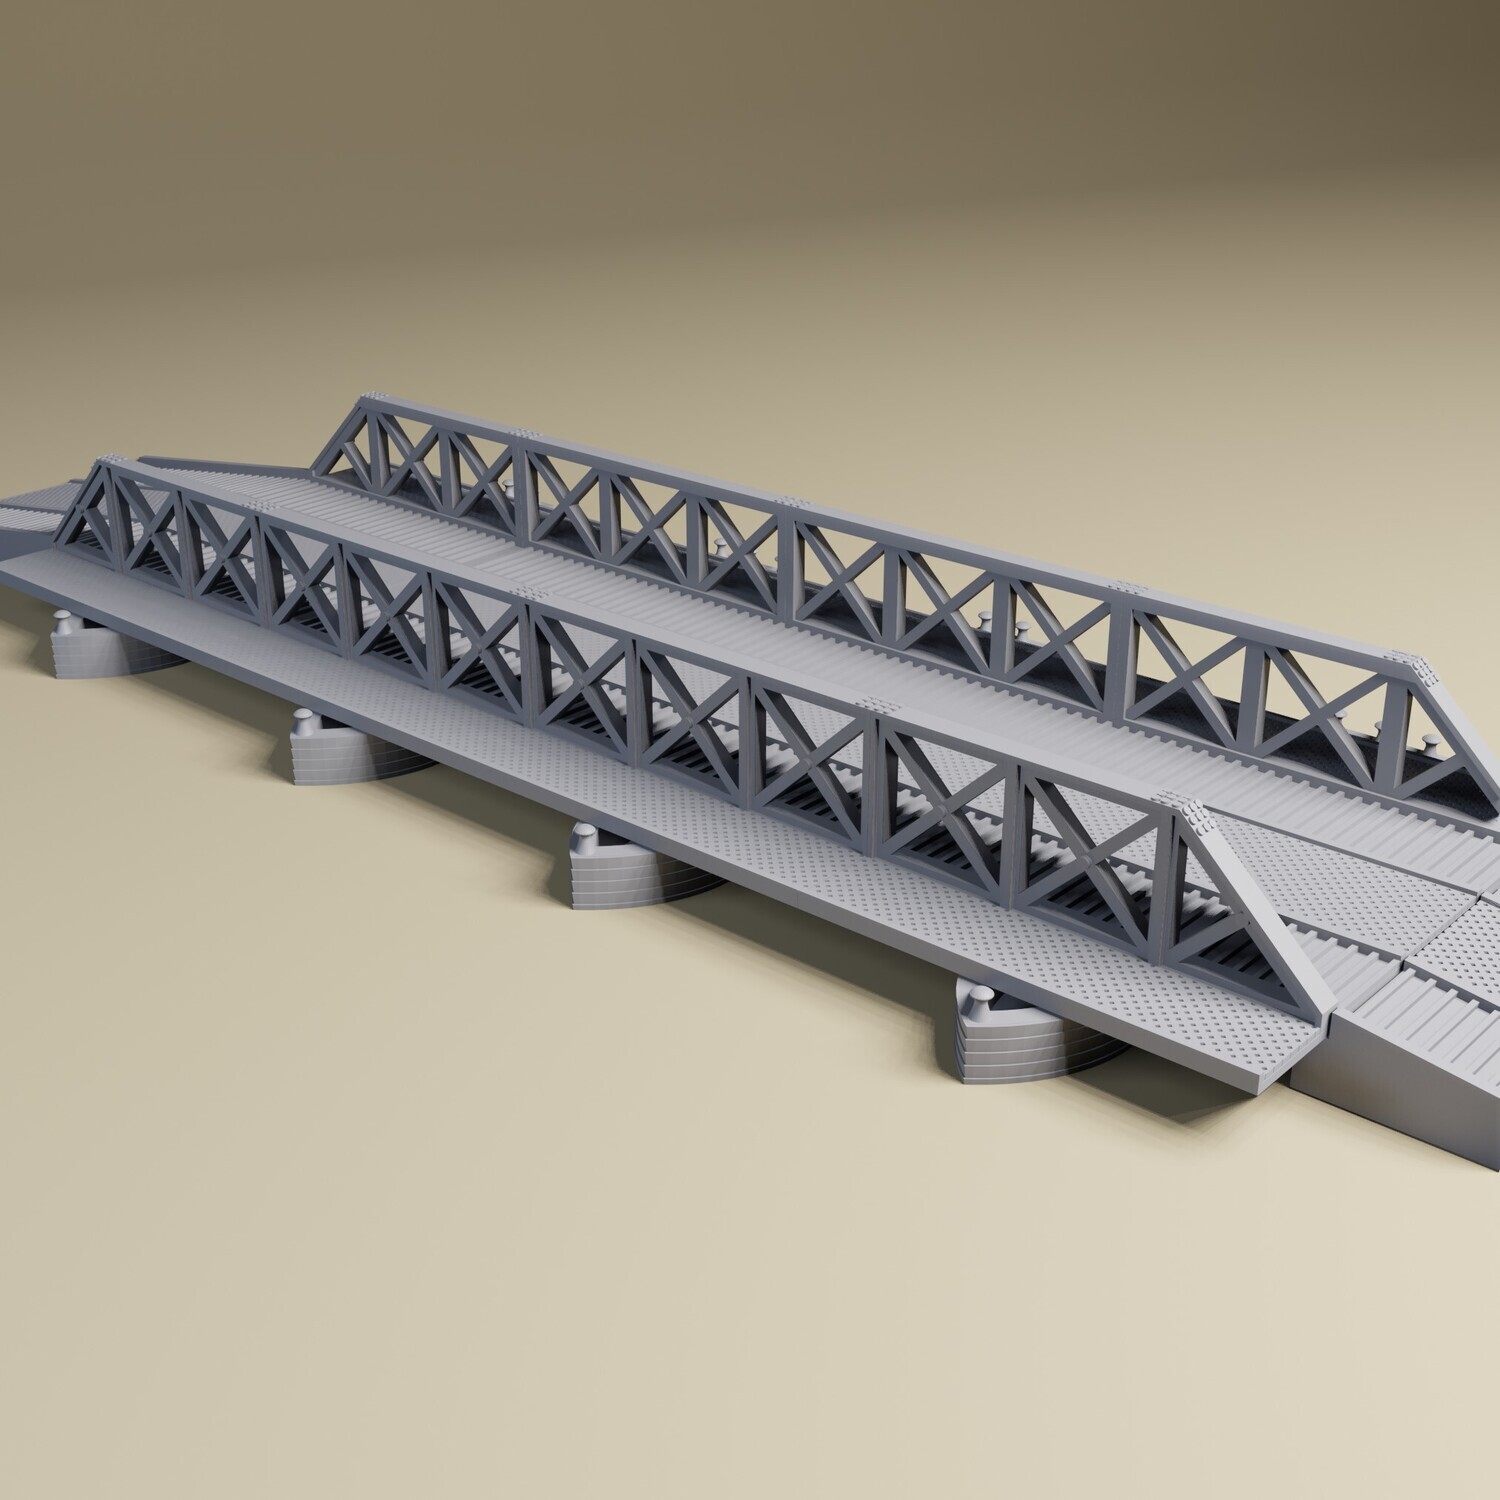 Pontoon/Bailey Bridge 3D Printed Terrain for 28mm, 1:64 and 20mm WWII Tabletop Wargaming and Dioramas | Bolt Action | Chain of Command